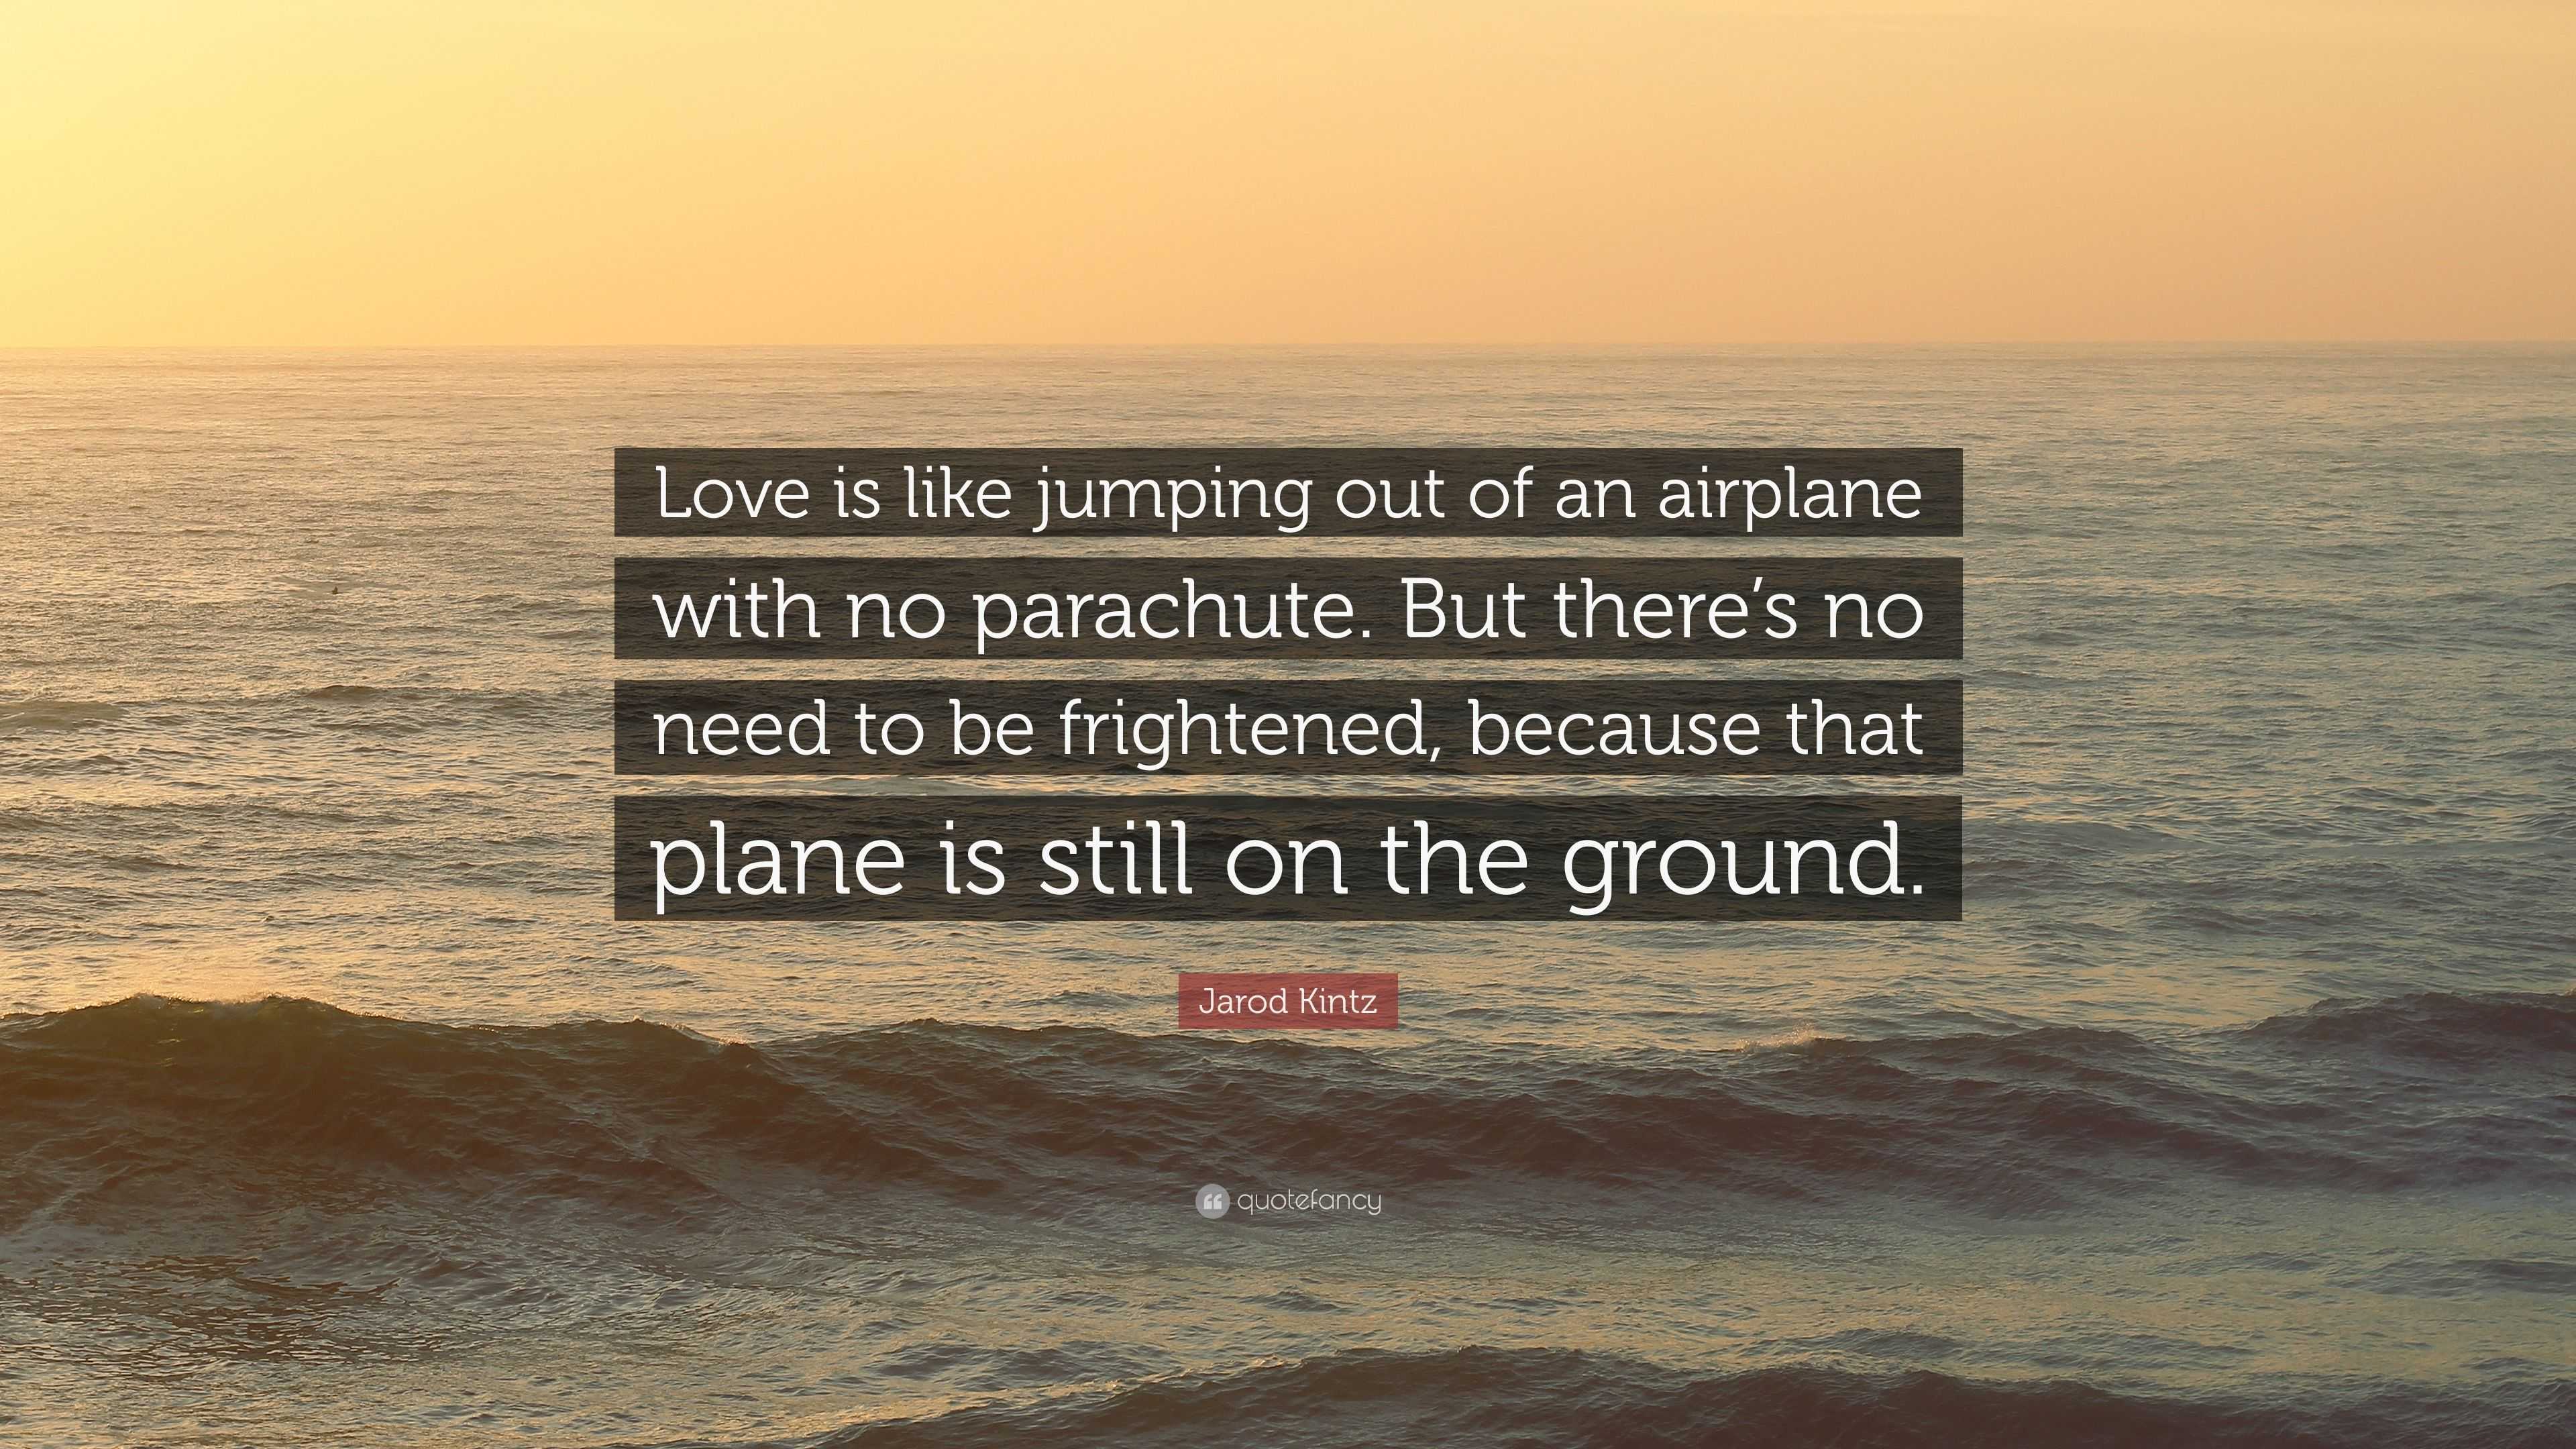 Jarod Kintz Quote “Love is like jumping out of an airplane with no parachute